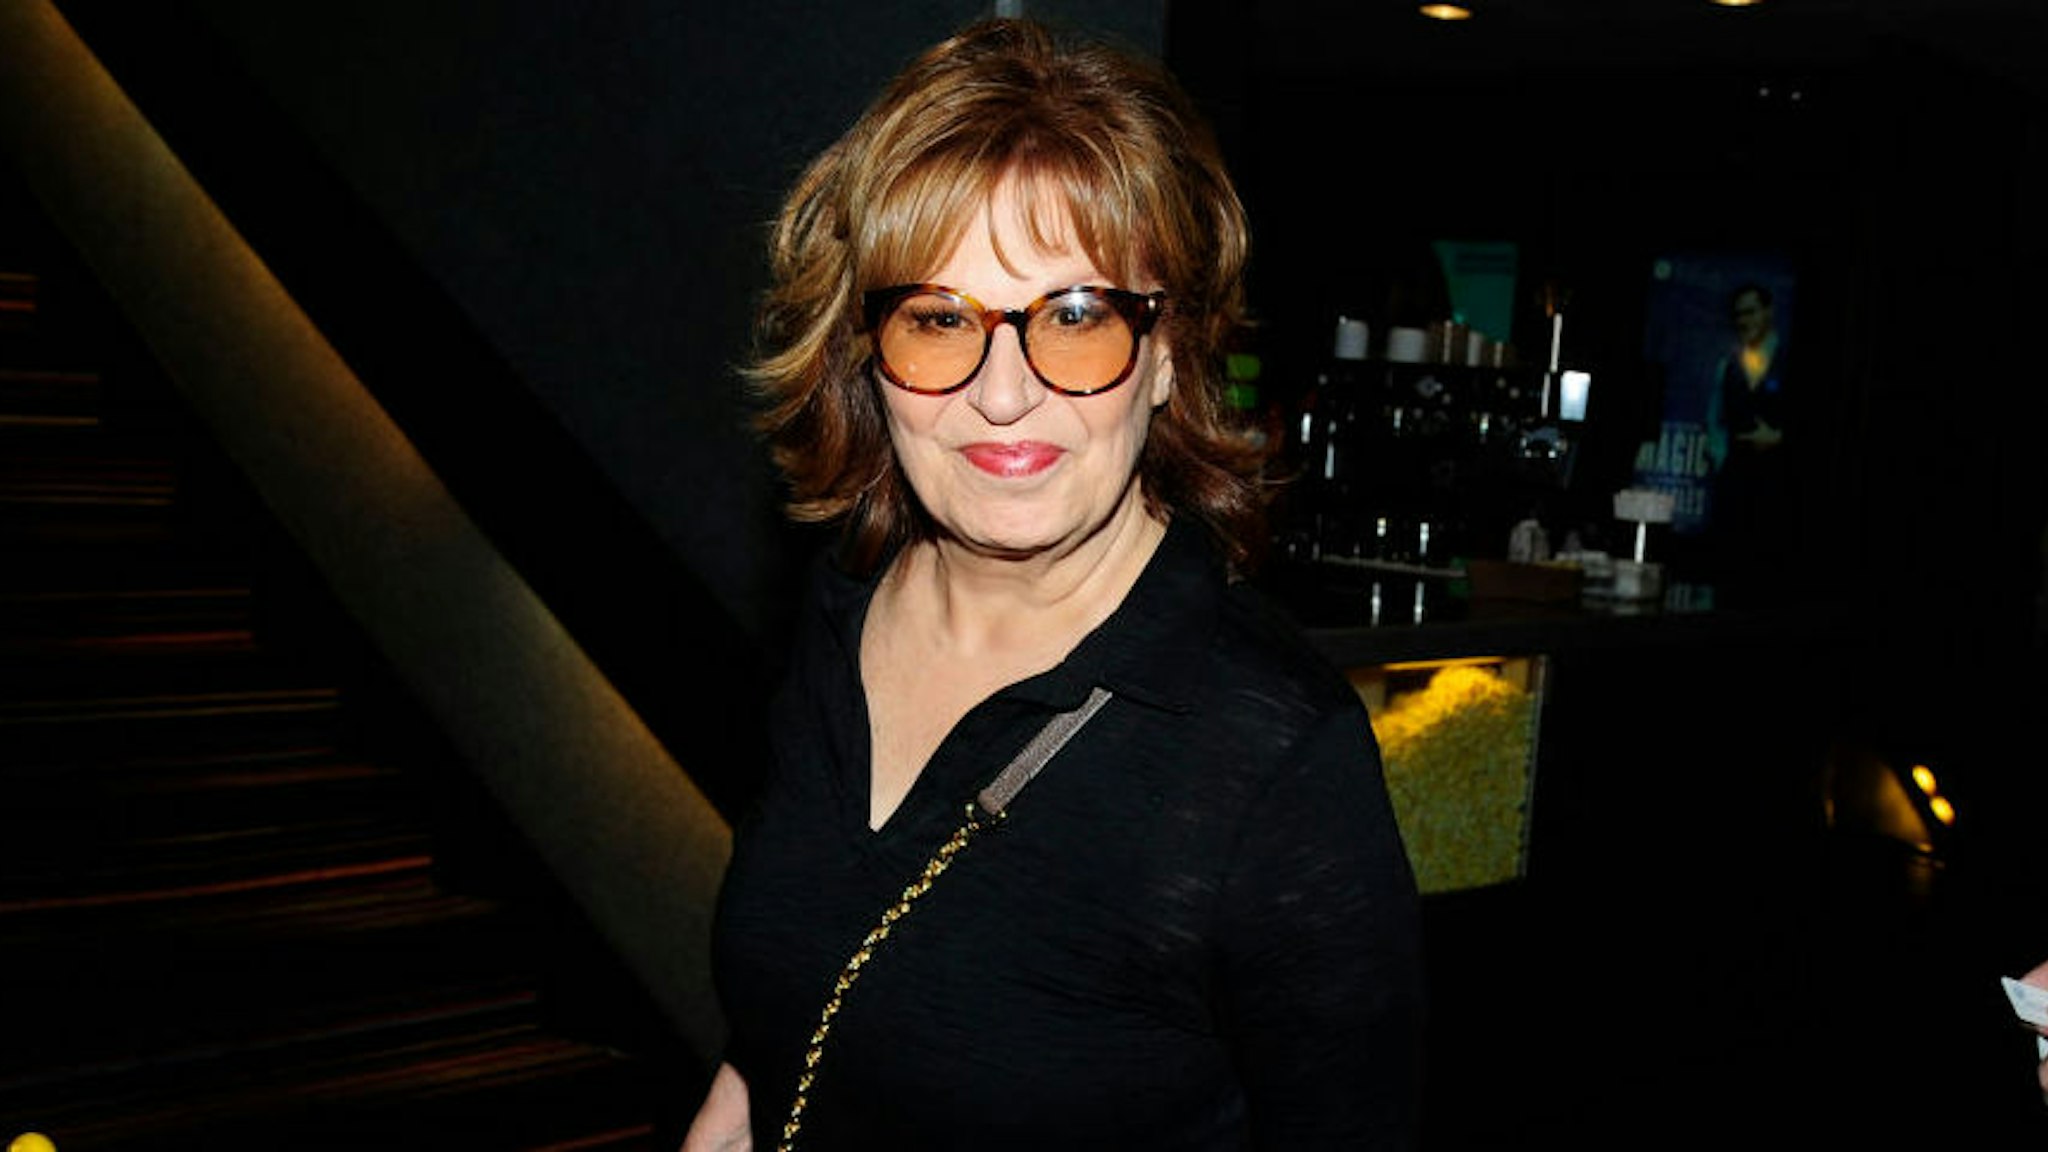 NEW YORK, NY - SEPTEMBER 3: Joy Behar attends Bergdorf Goodman And Warner Bros. Host A Special Screening Of "The Goldfinch" at Cinema 123 on September 3, 2019 in New York City.